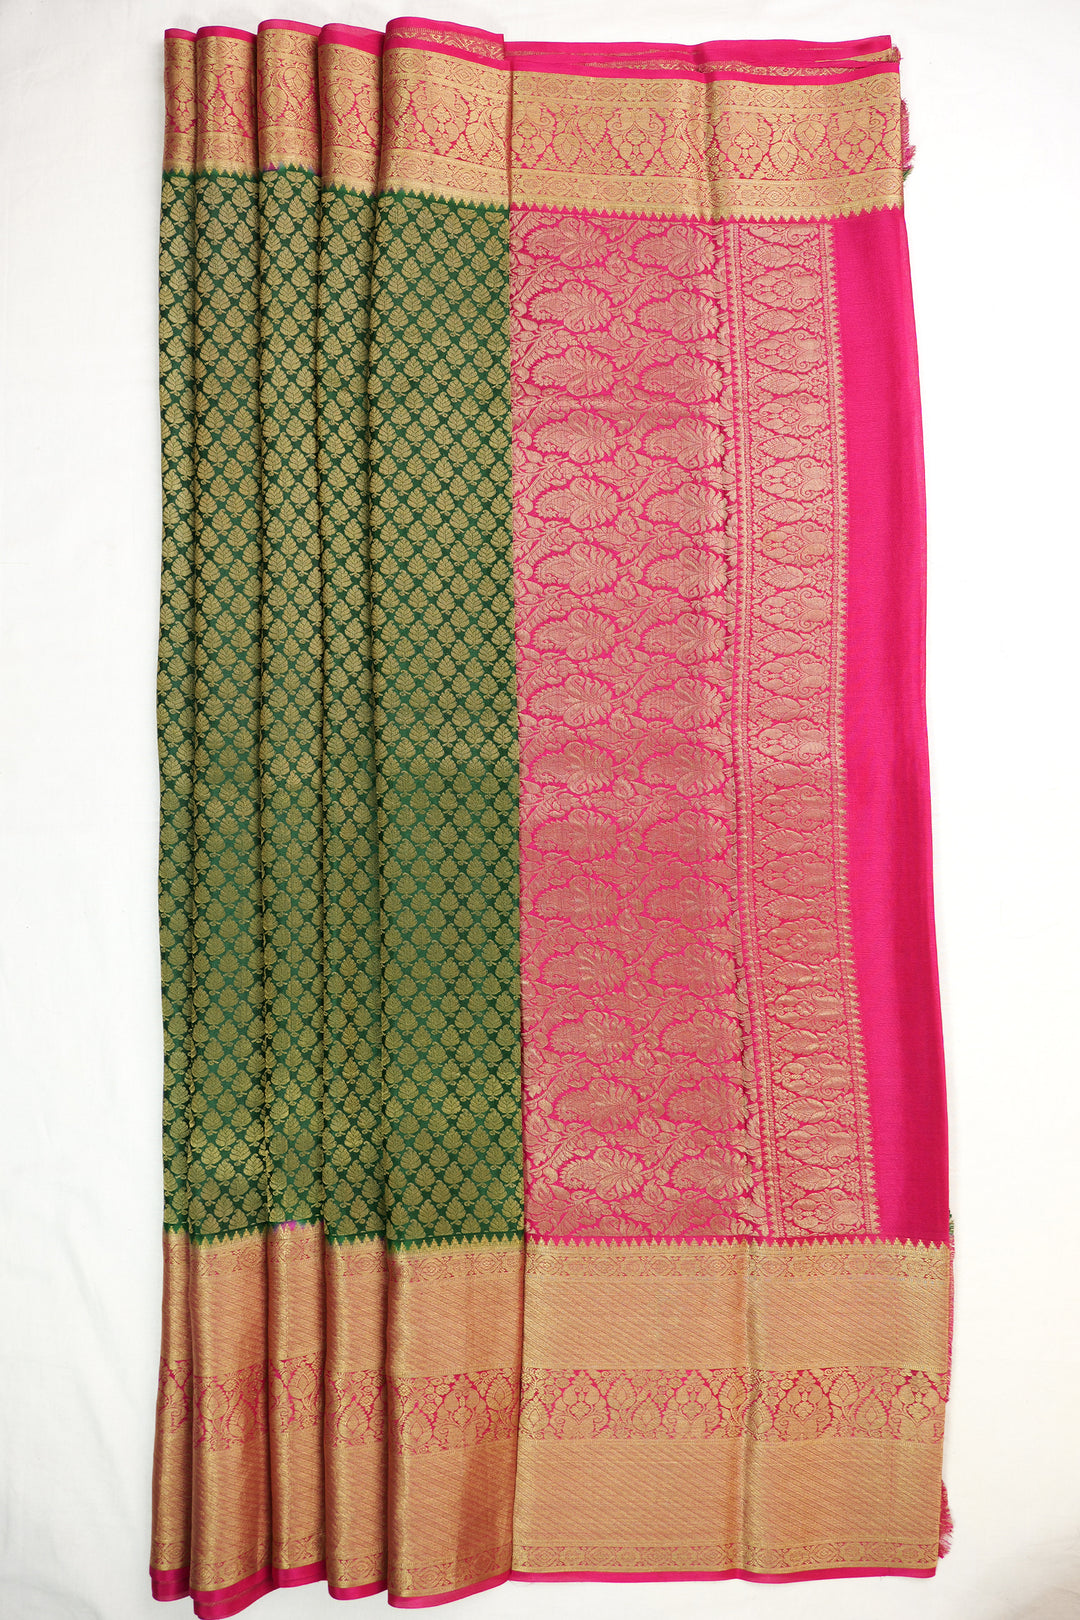 PURE MYSORE SILK SAREE IN GREEN COLOUR WITH BROCADE DETAILING AND CONTRAST BORDER | SILK MARK CERTIFIED